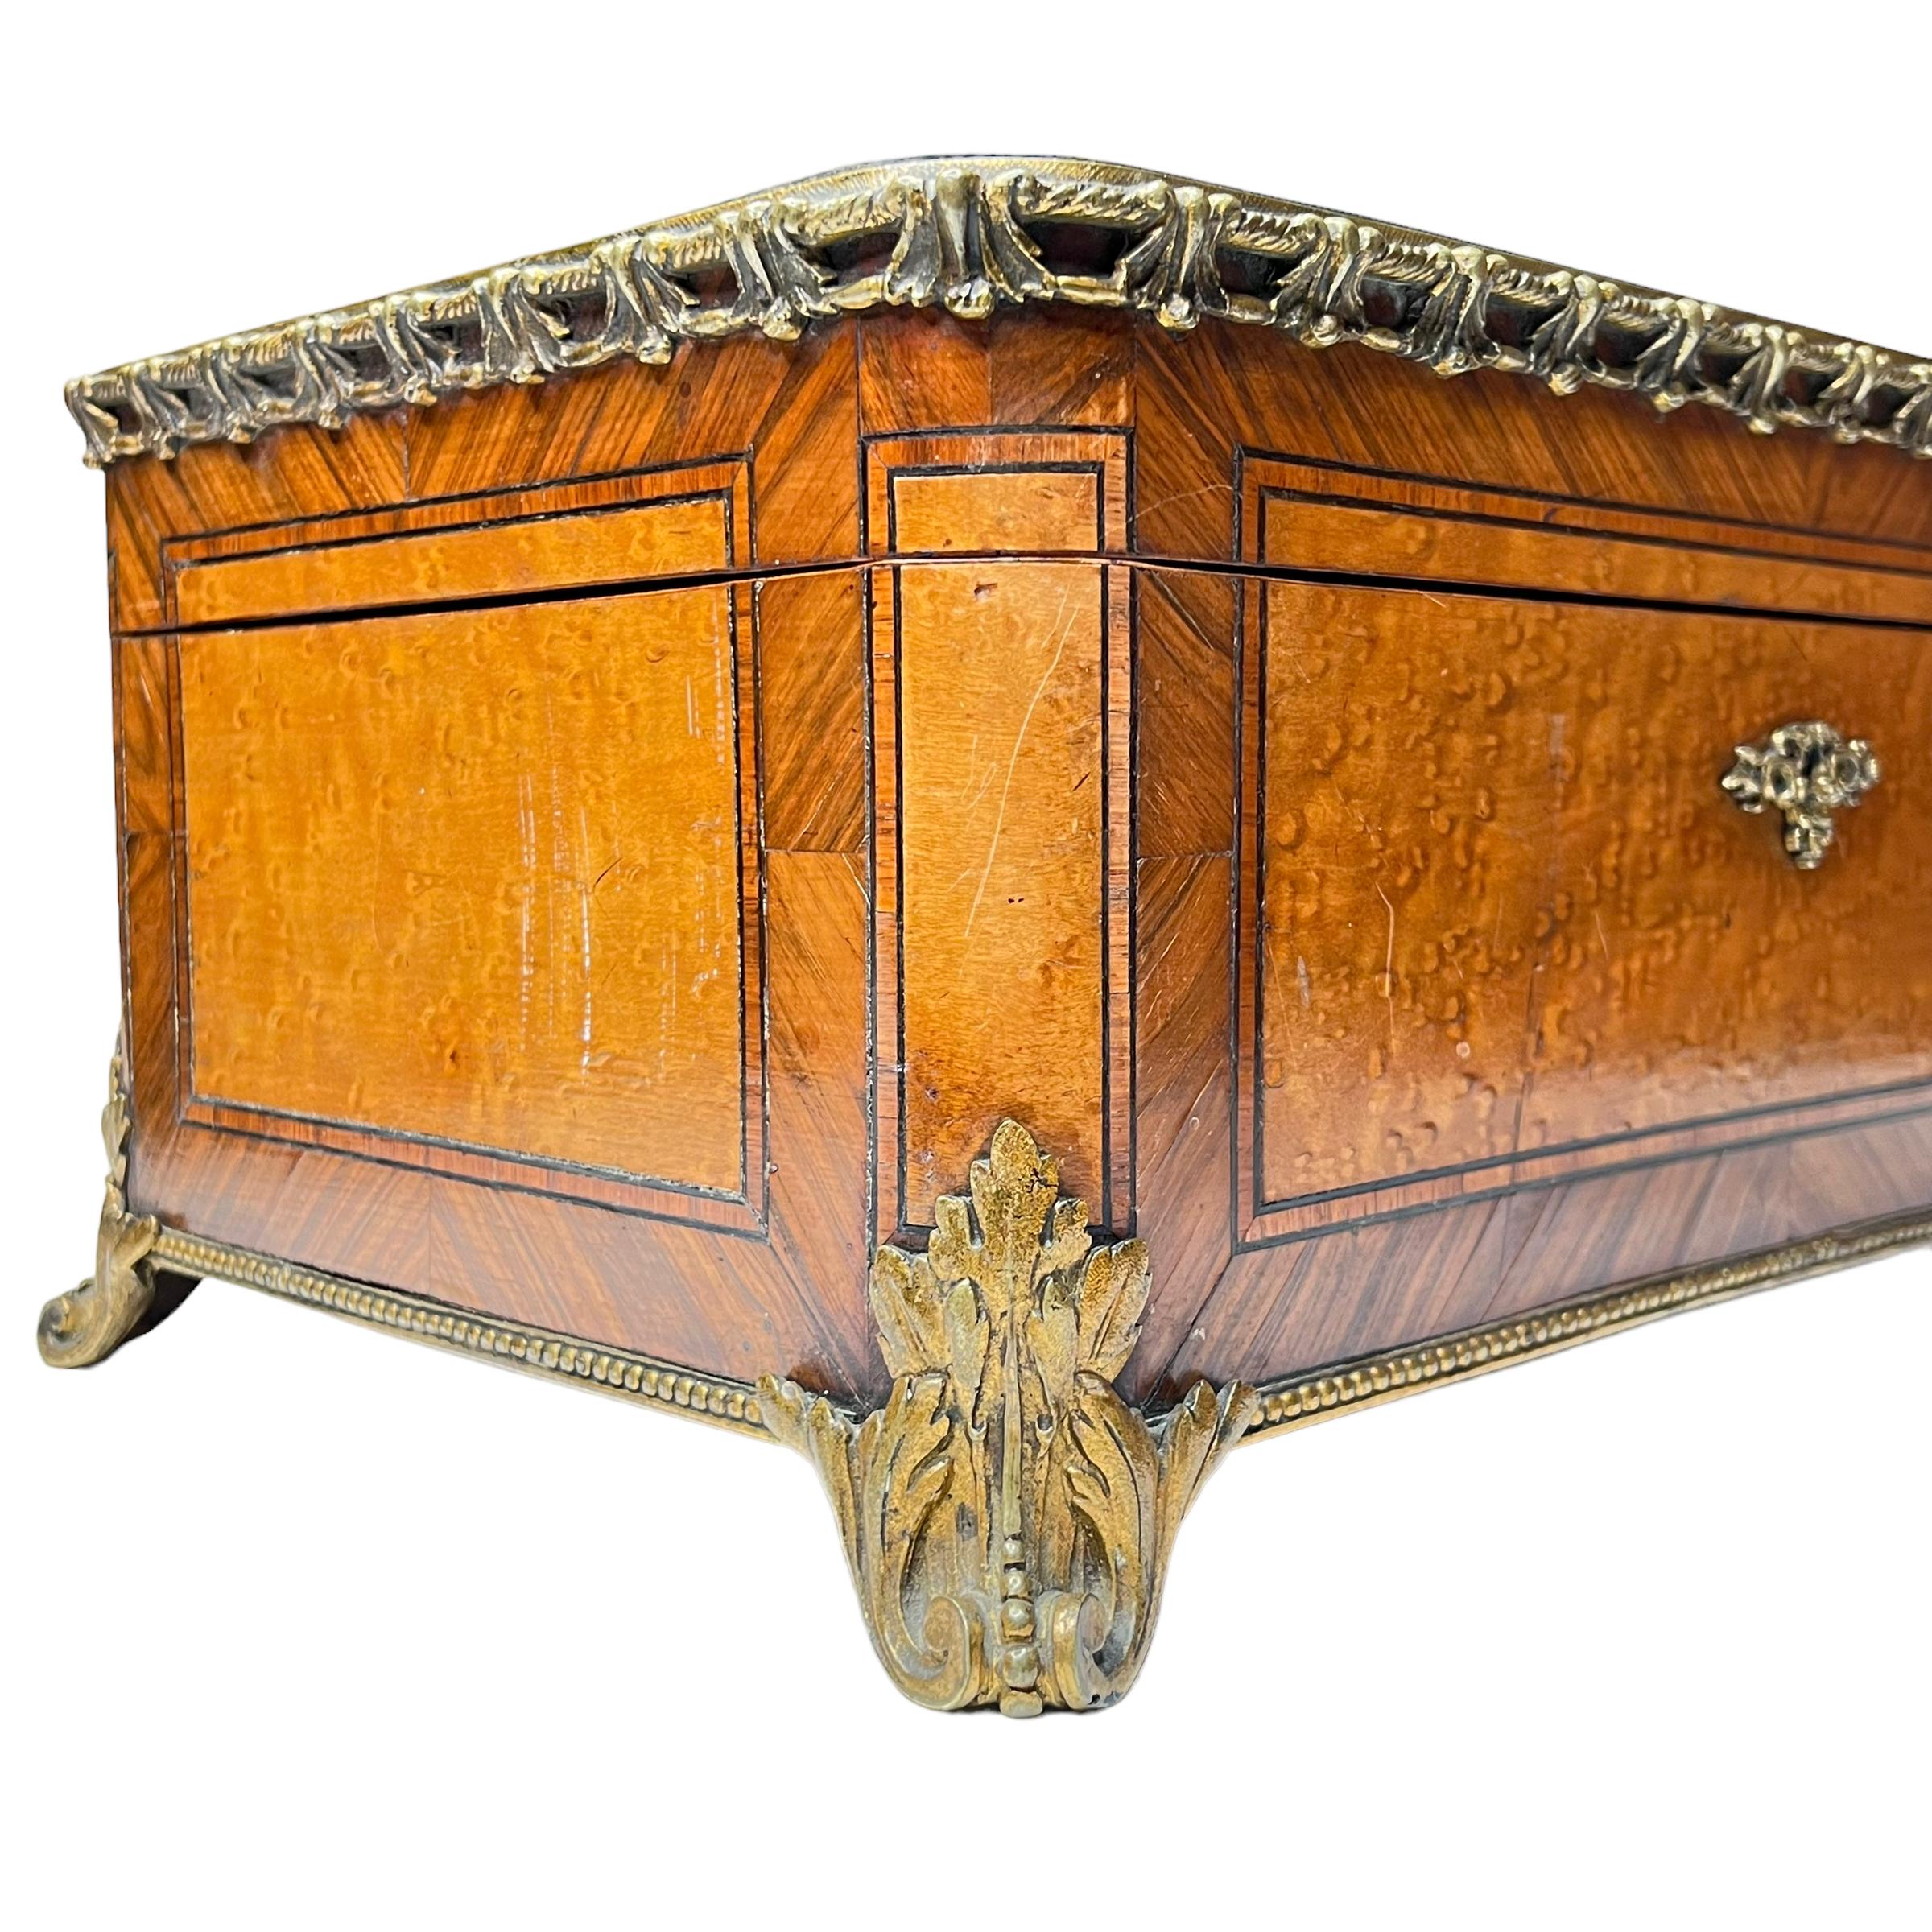 Bronze Paul Sormani Fruitwood Box Dedicated to Marie, Dated 1868 For Sale